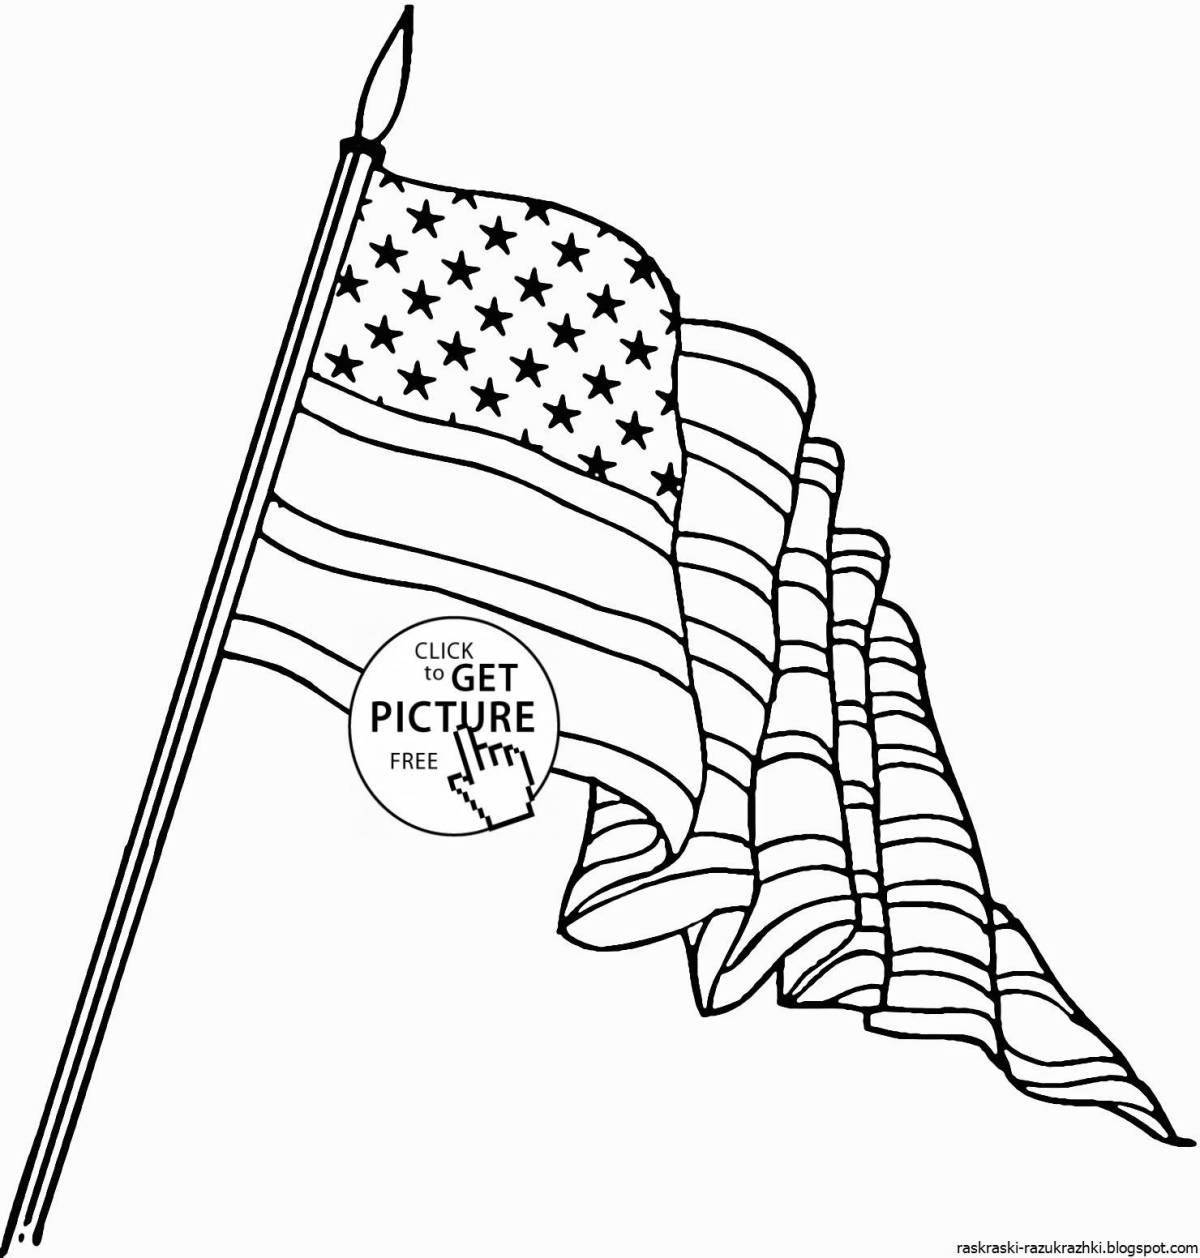 Gorgeous flag coloring book for kids